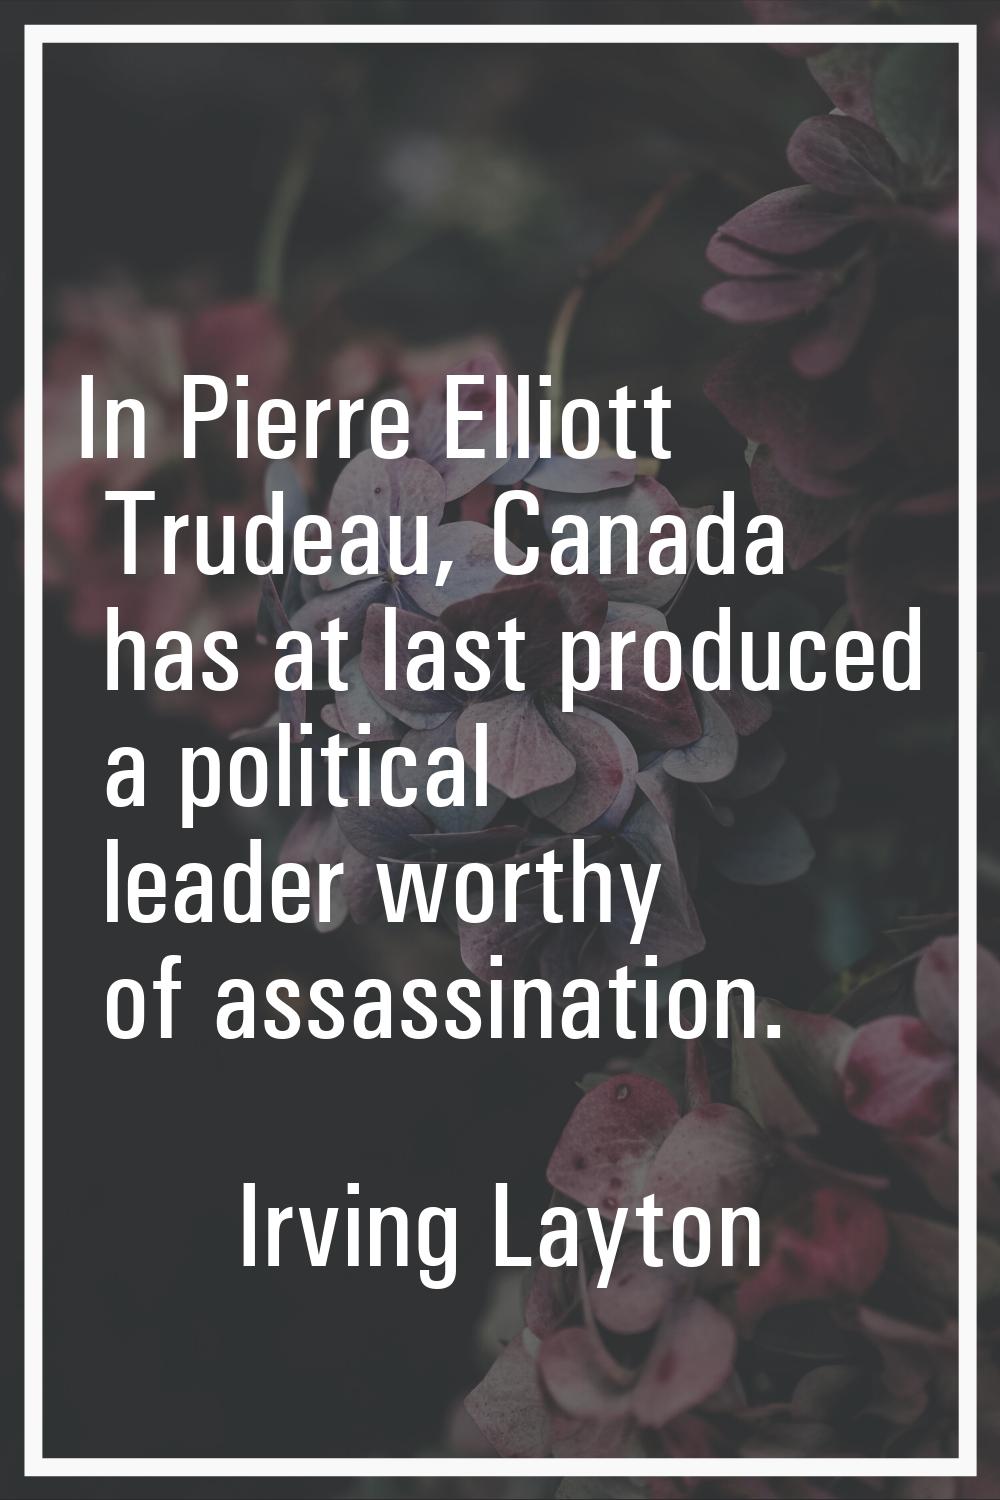 In Pierre Elliott Trudeau, Canada has at last produced a political leader worthy of assassination.